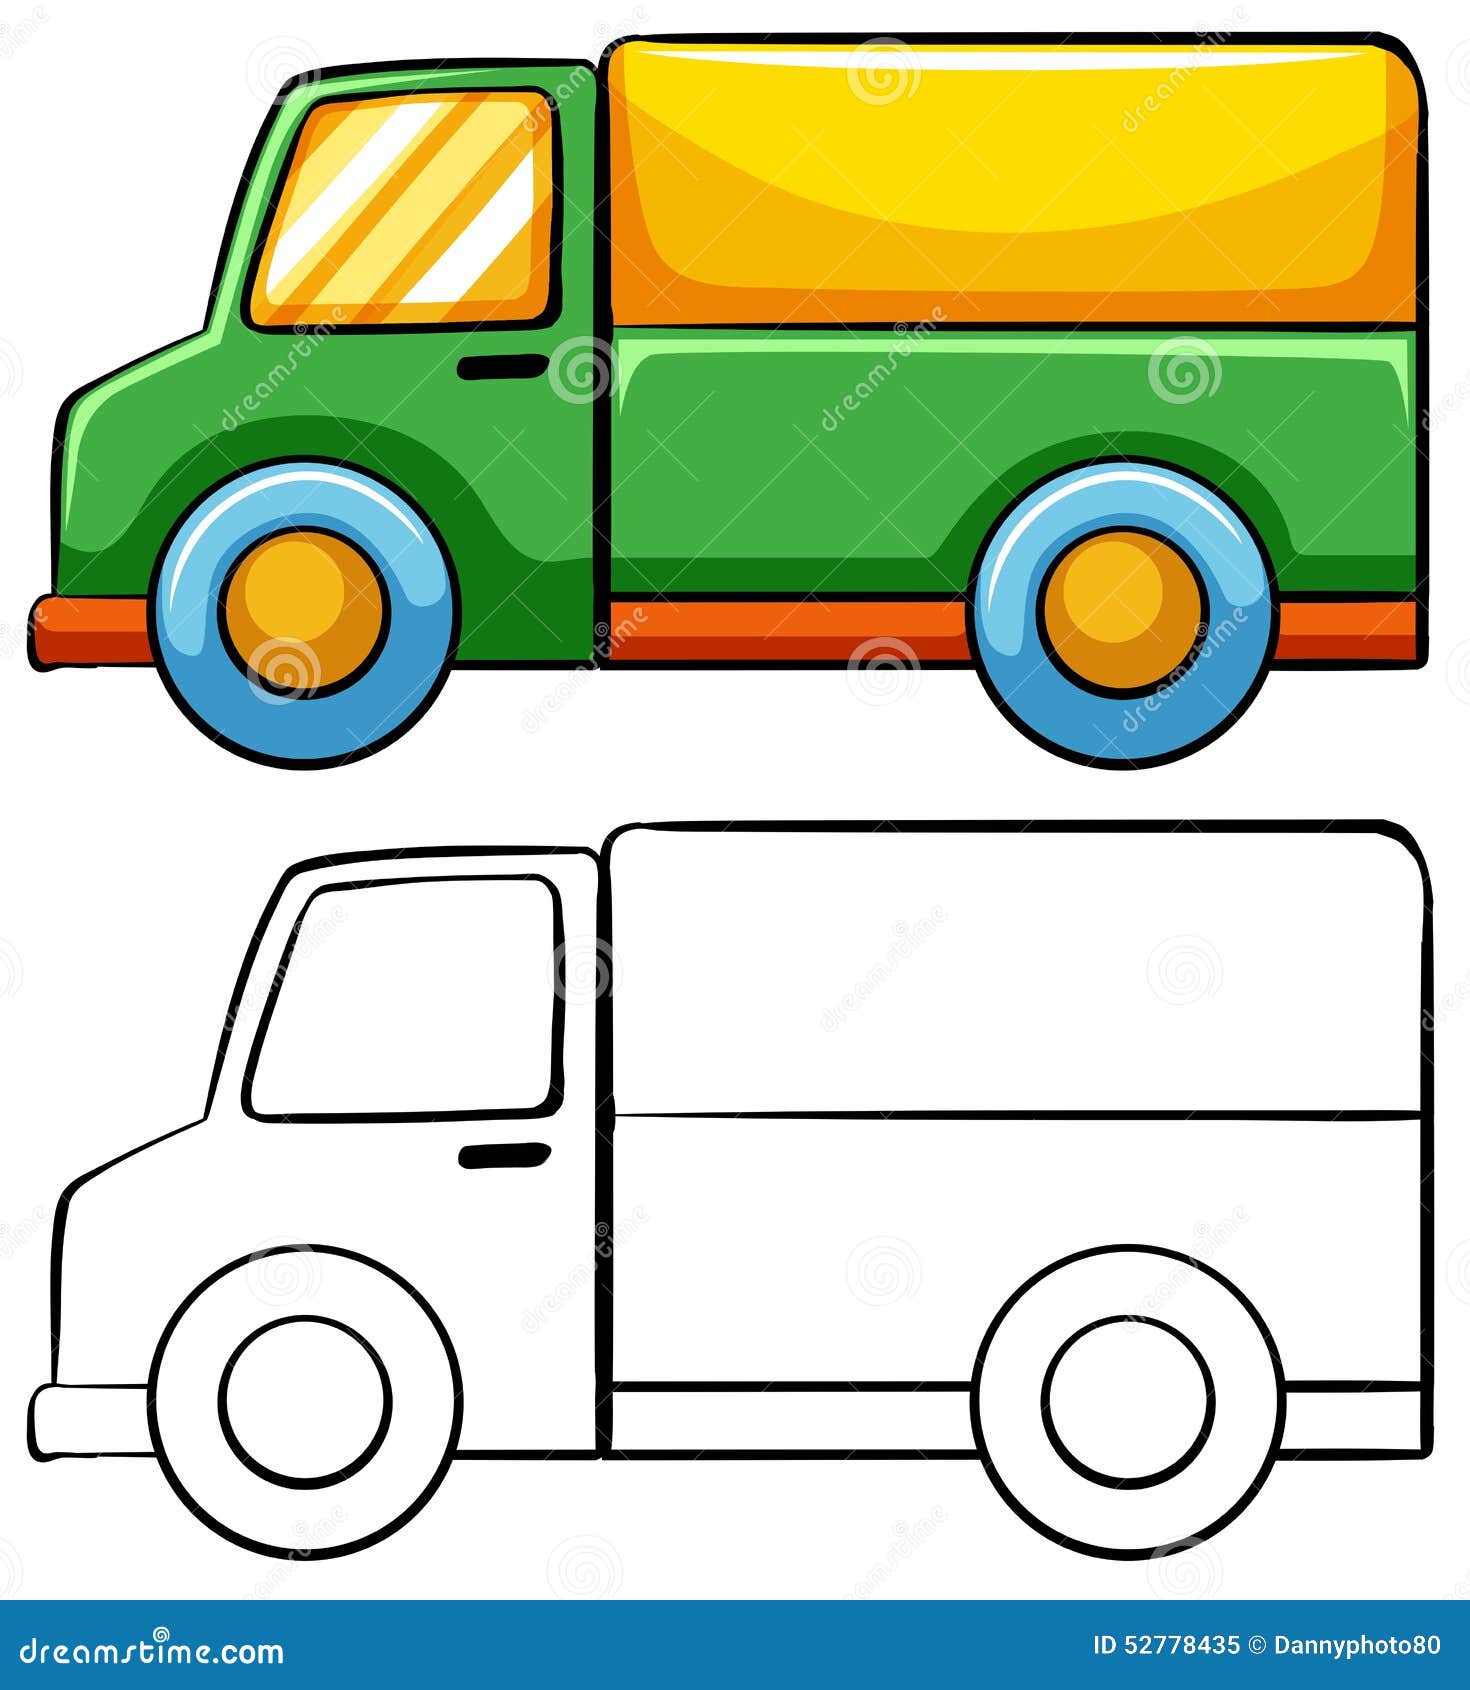 Delivery truck stock vector. Illustration of doodle, engine - 52778435